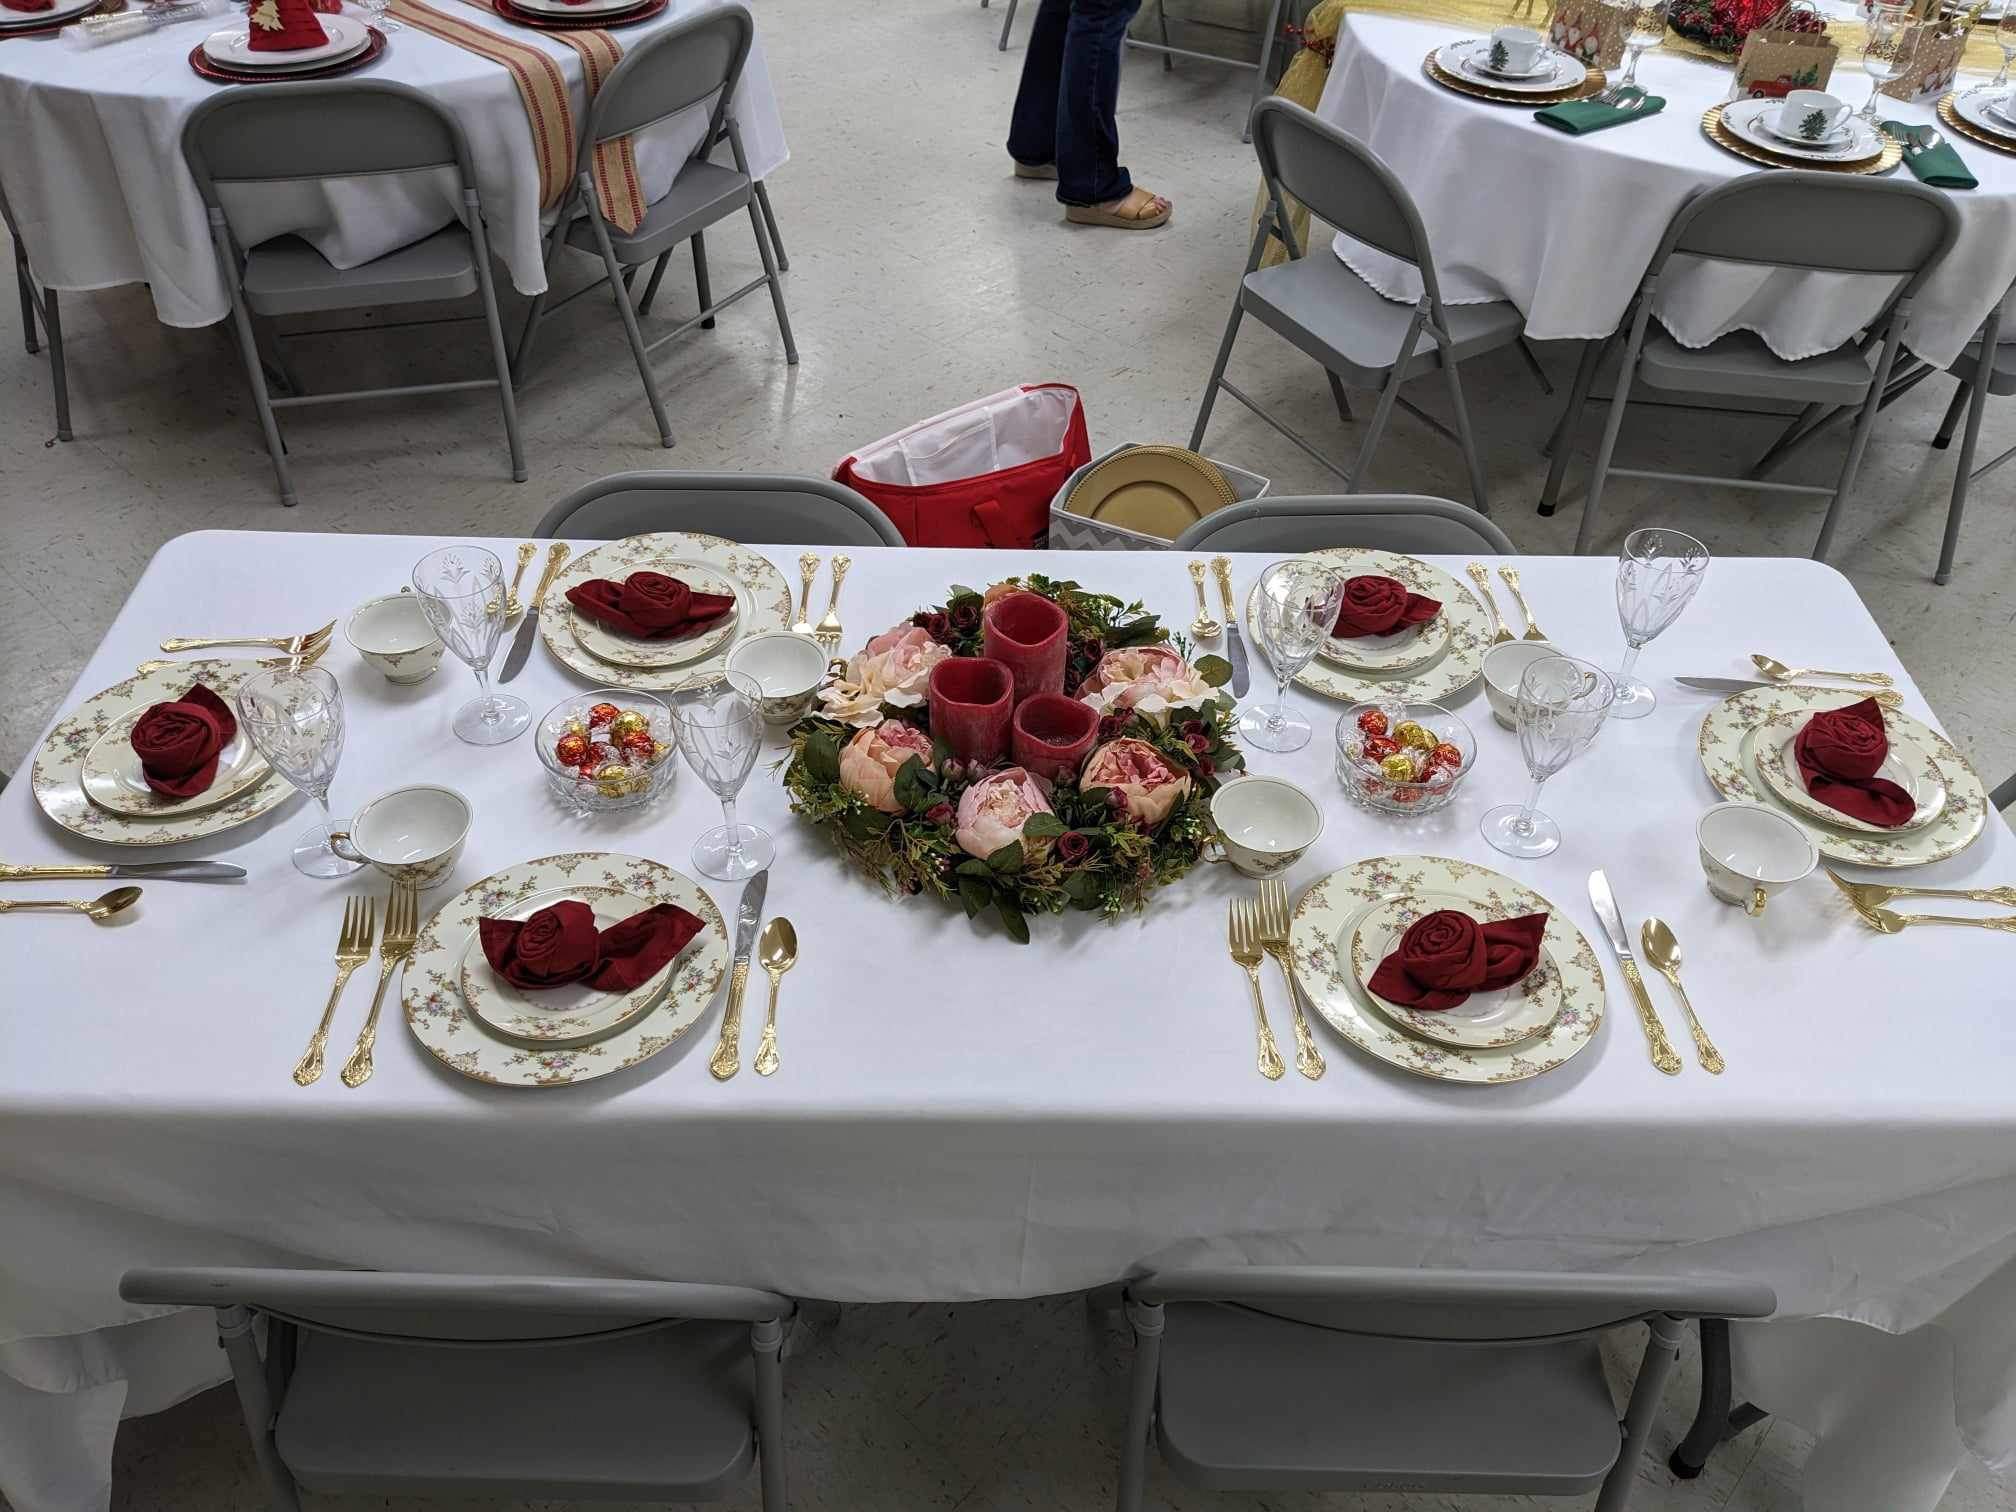 Festival of Tables